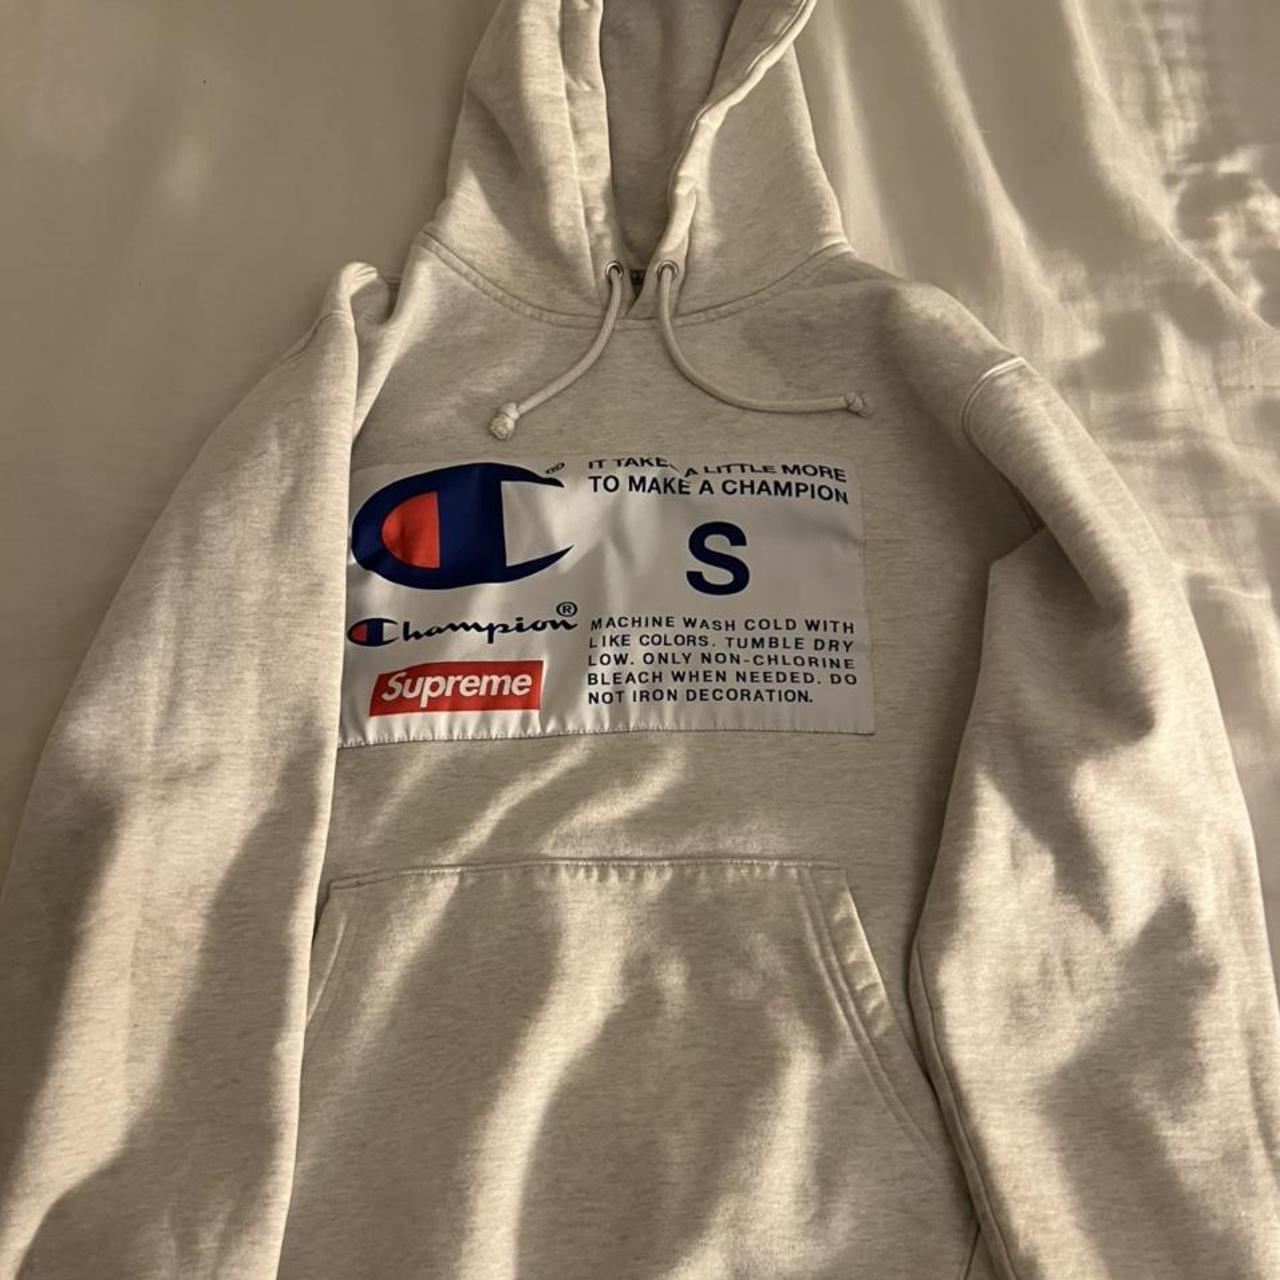 Supreme x Champion Hoodie , Grail that was released...